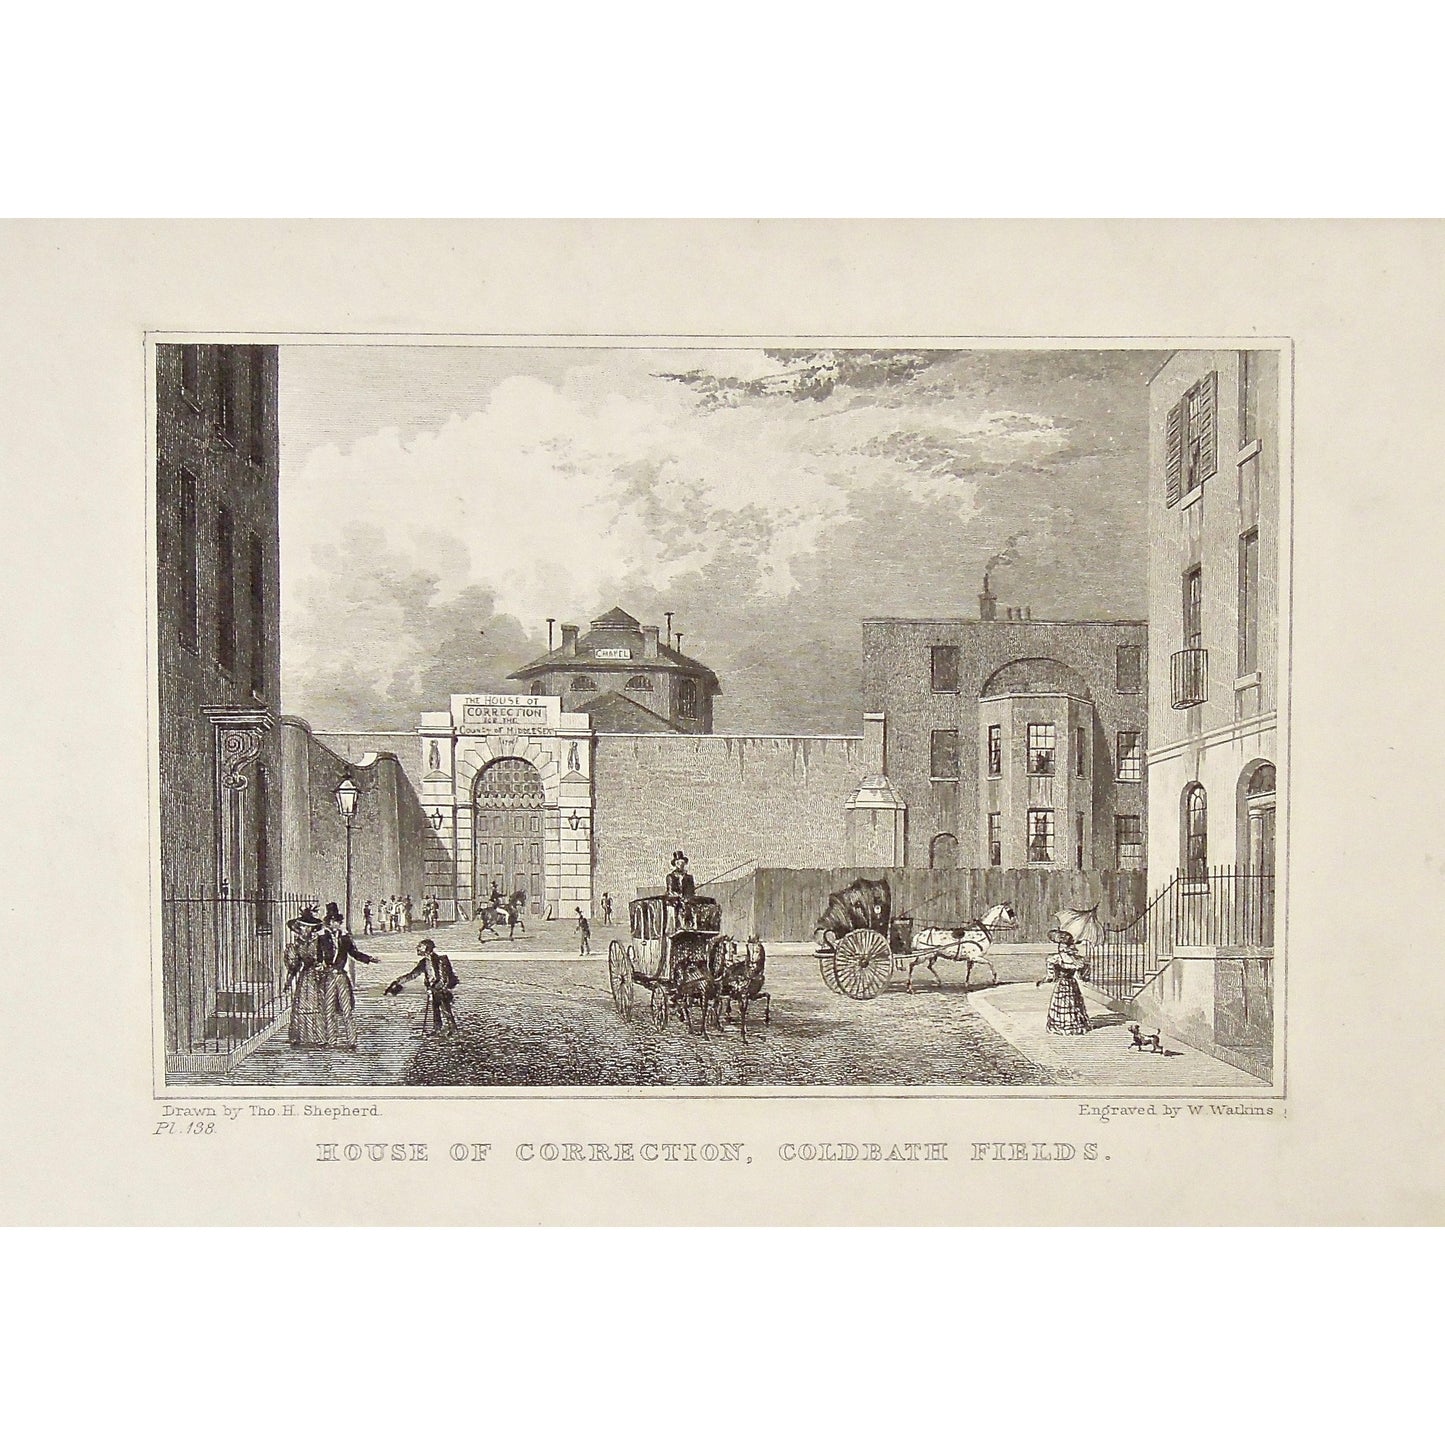 House of Correction, Coldbath Fields. / The Old Bull & Mouth Inn, St. Martins-Le-Grand, now pulled down.  (S2-47)